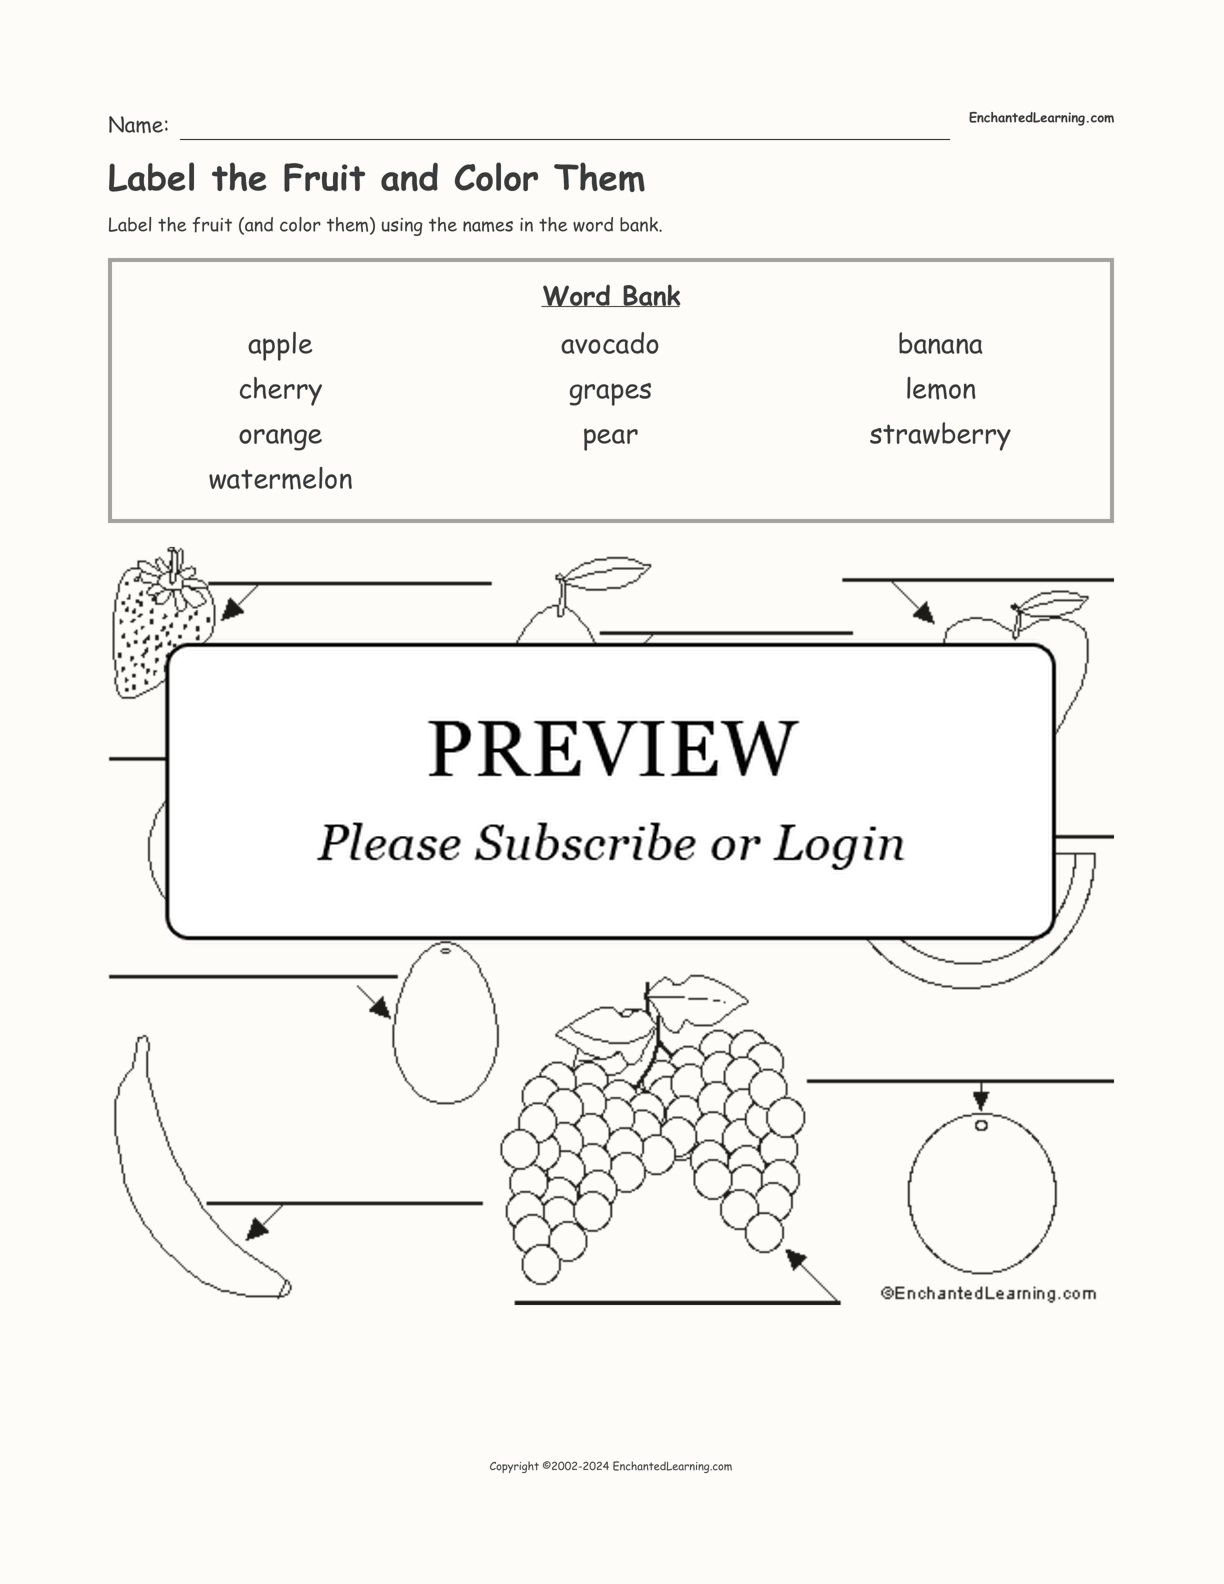 Label the Fruit and Color Them interactive worksheet page 1